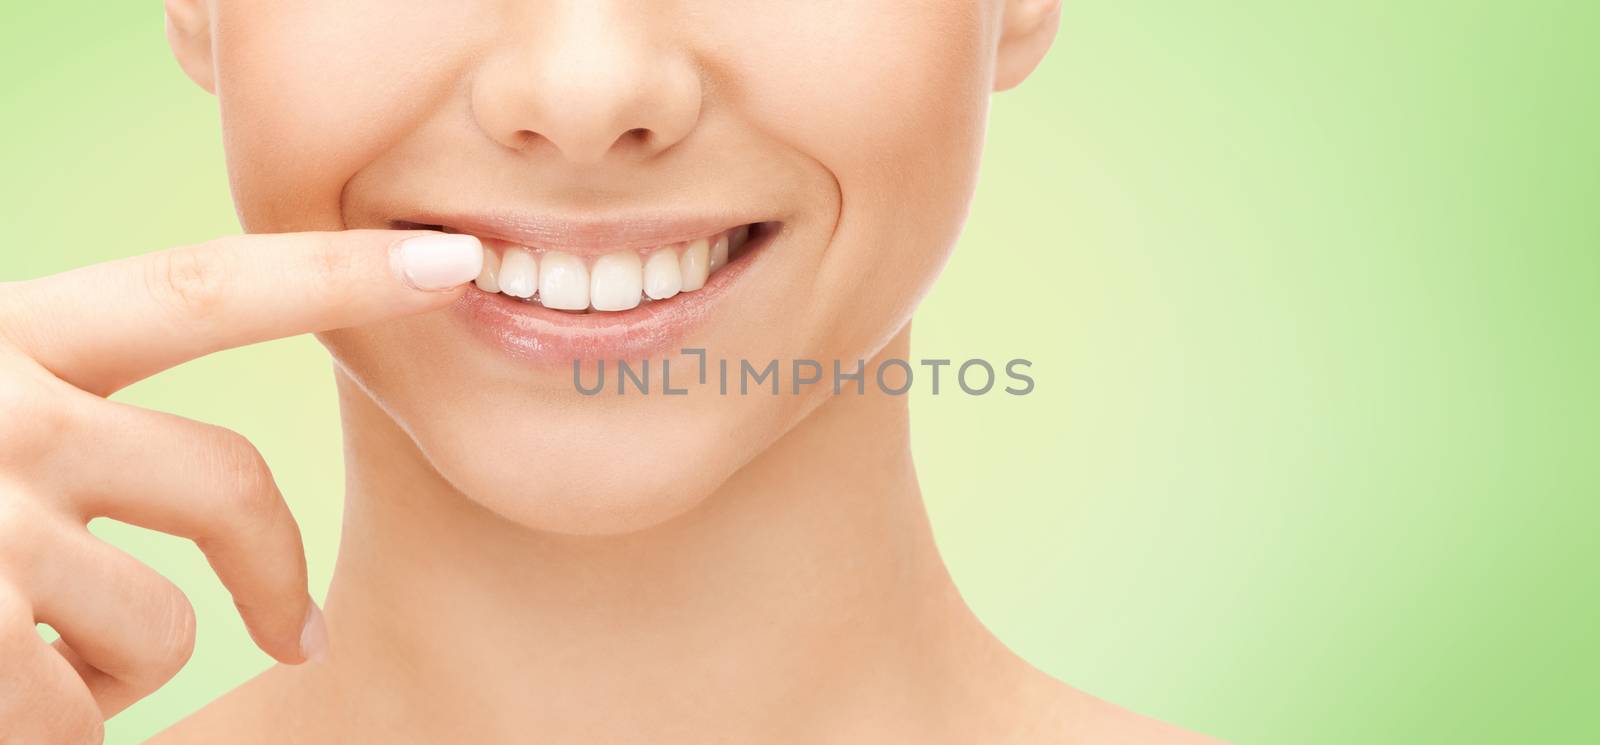 dental health, beauty, hygiene and people concept - close up of smiling woman face pointing to teeth over green natural background